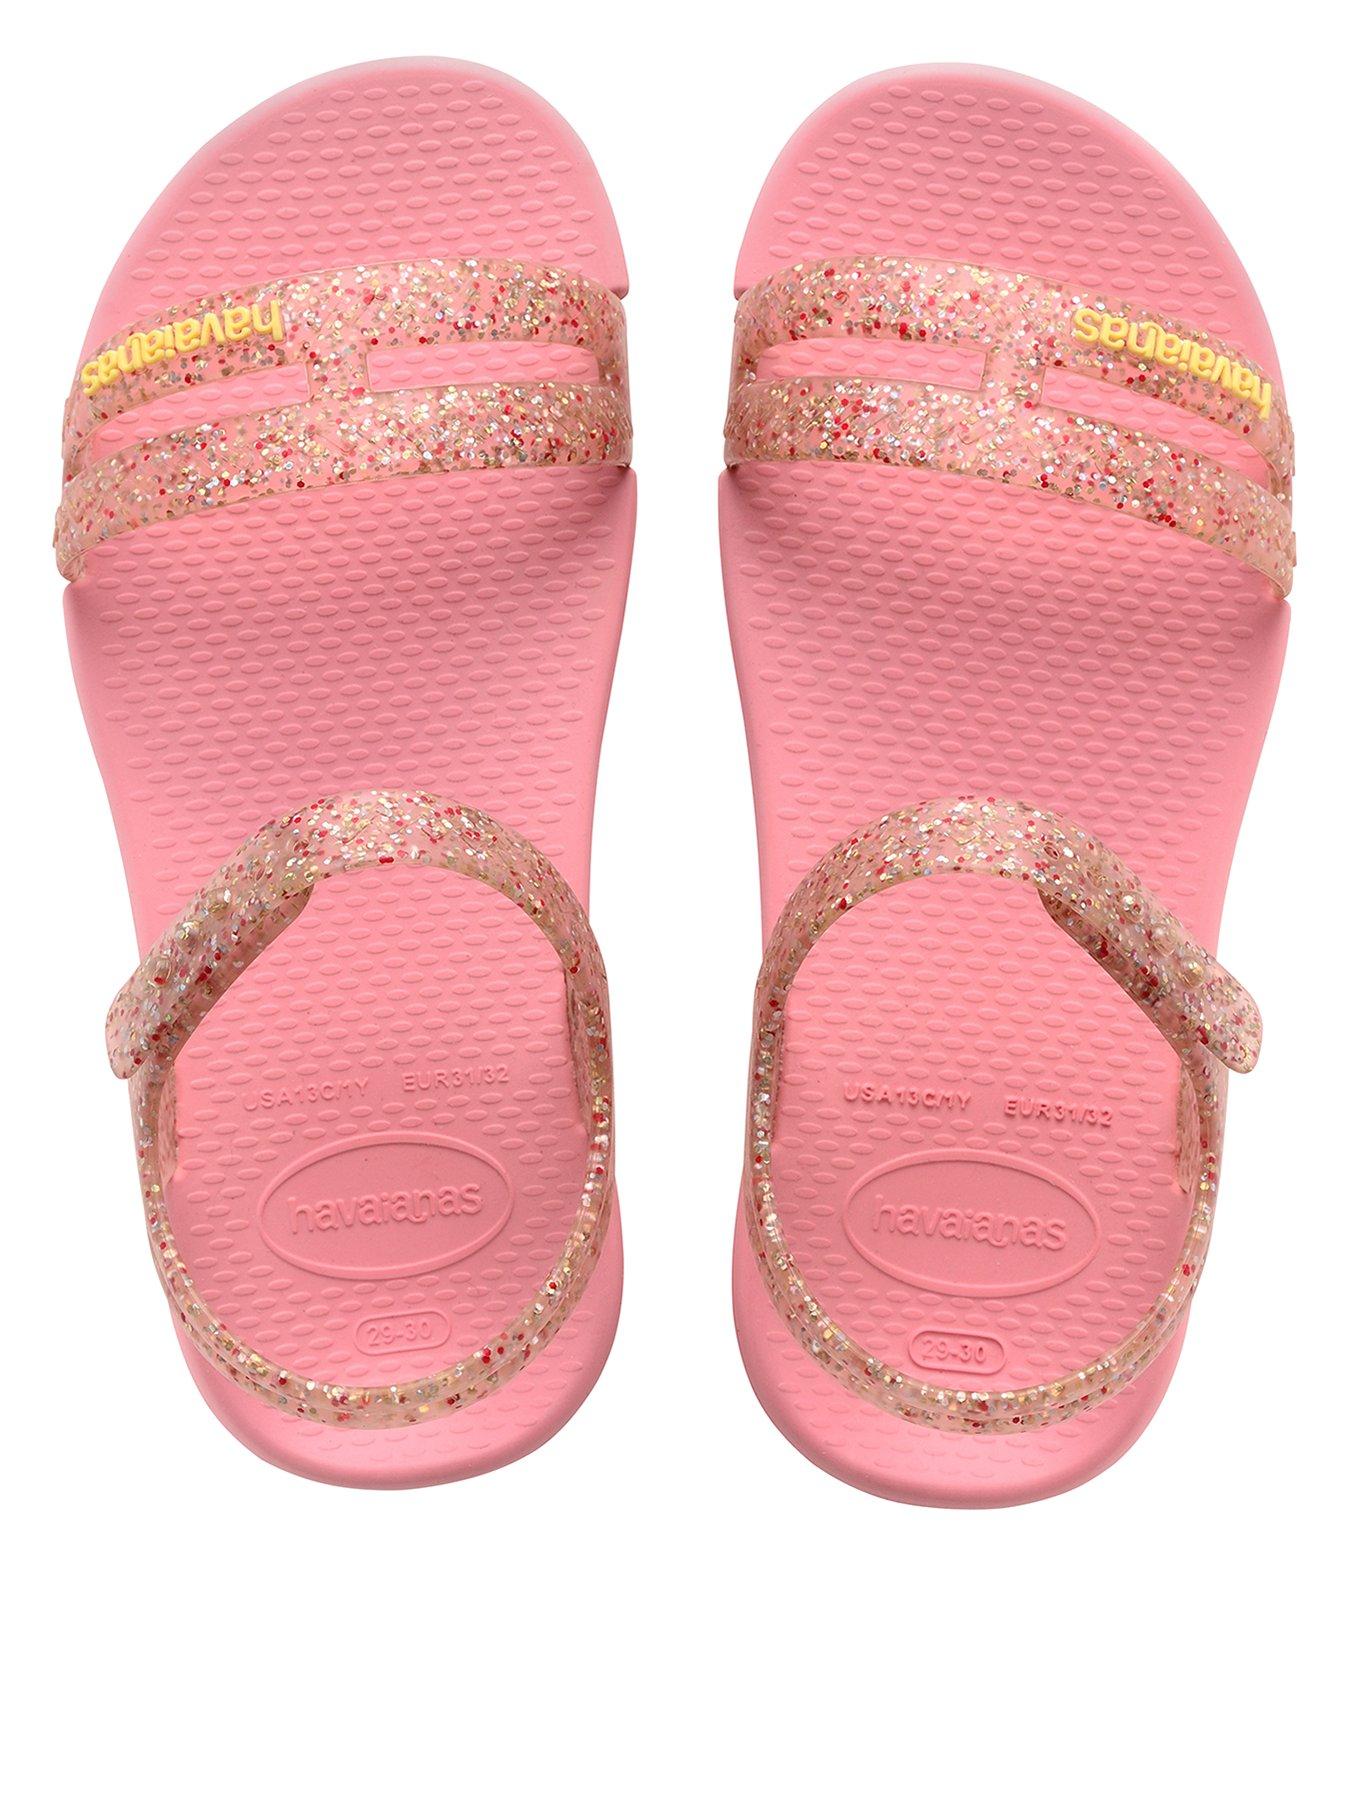 Havaianas Kids Play Mall Glitter Sandal, Gold, Size 12 Younger